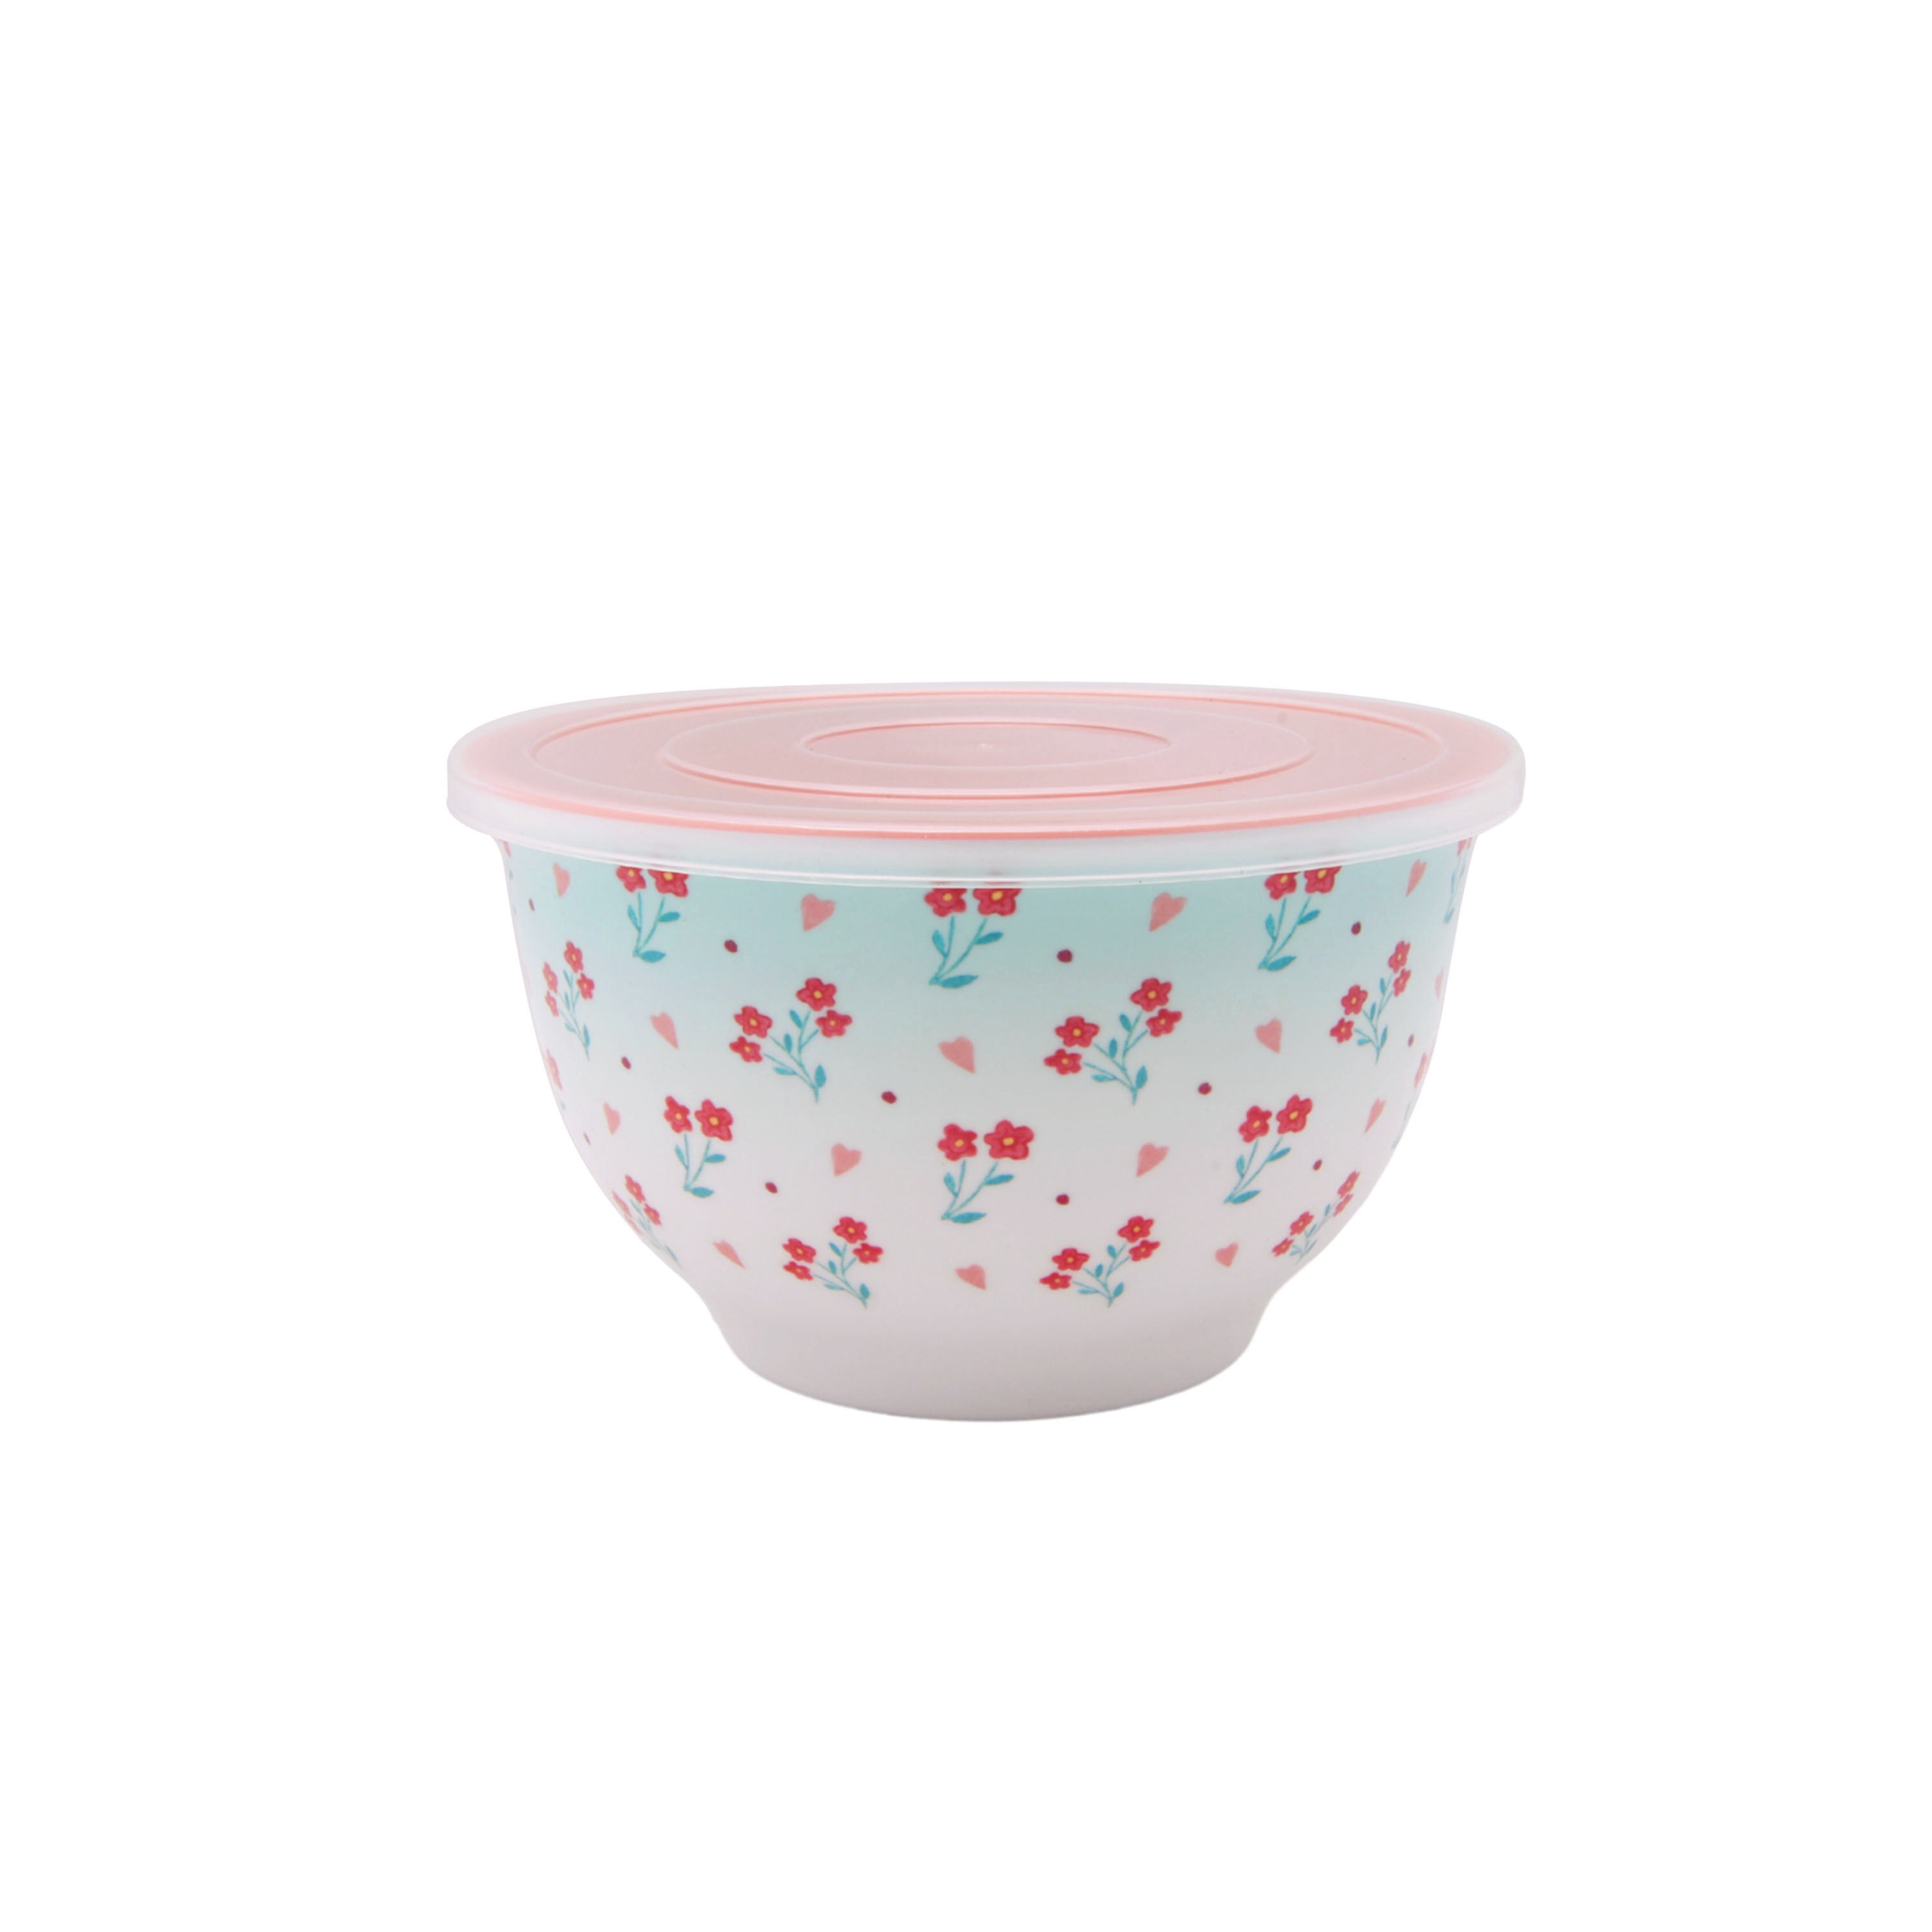 The Pioneer Woman Mixing Bowl Set with Lids, Sweet Romance, 18 Piece Set,  Melamine - AliExpress